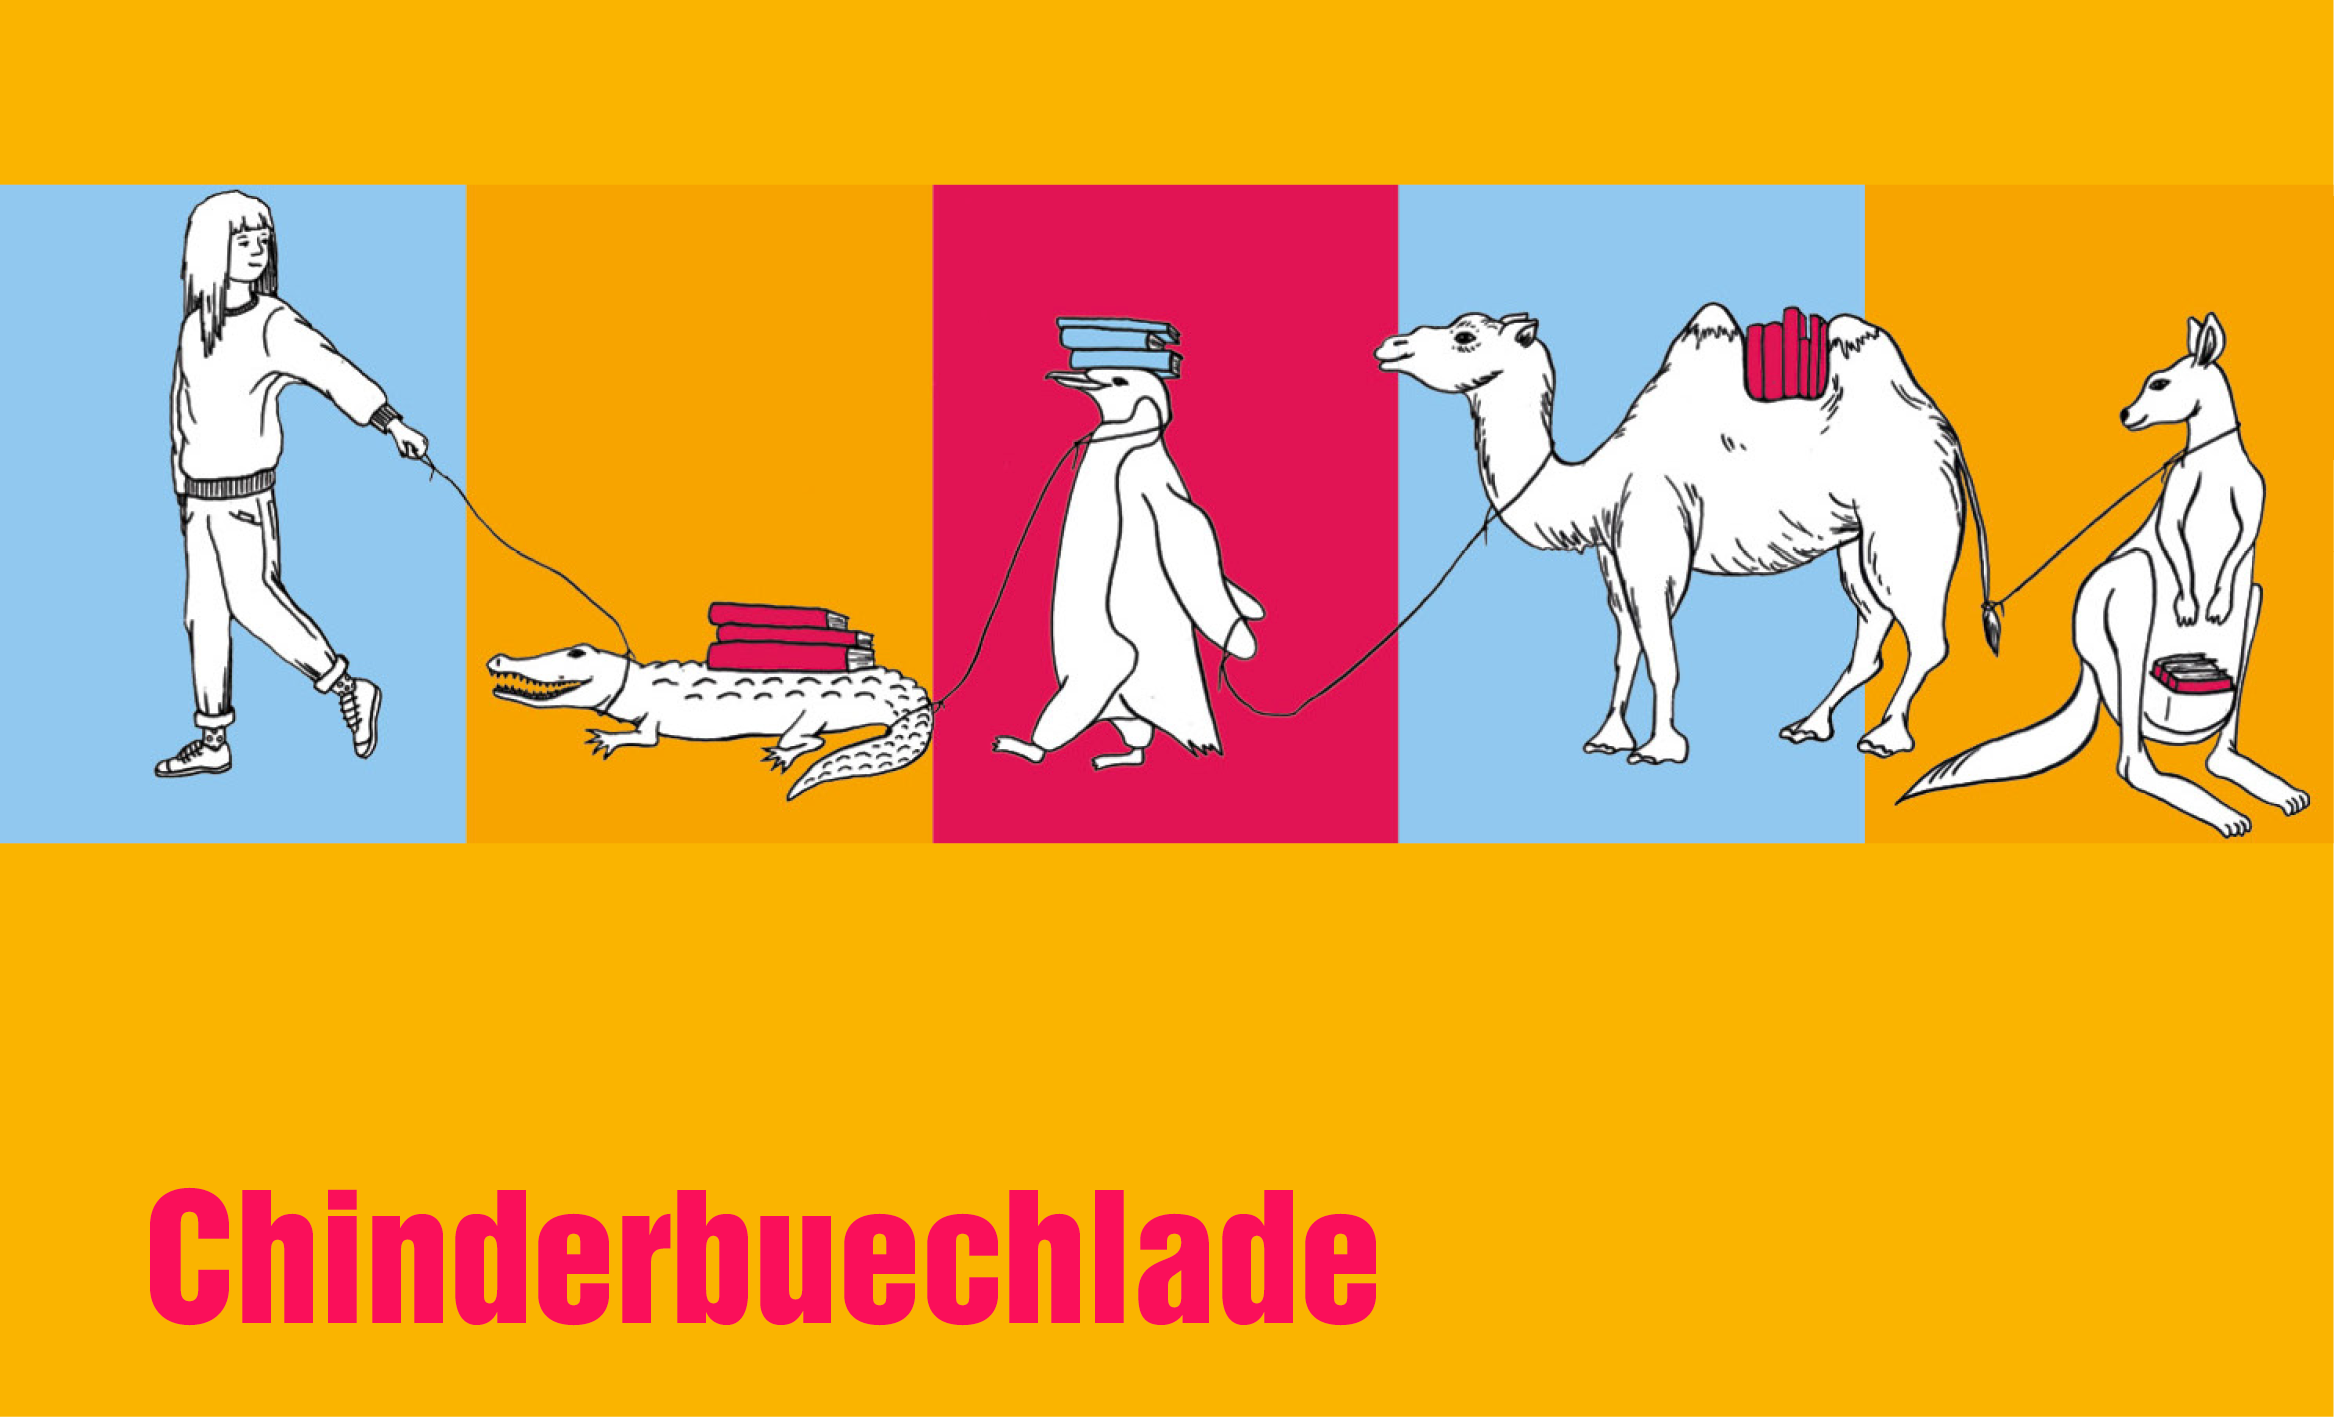 Chinderbuechlade